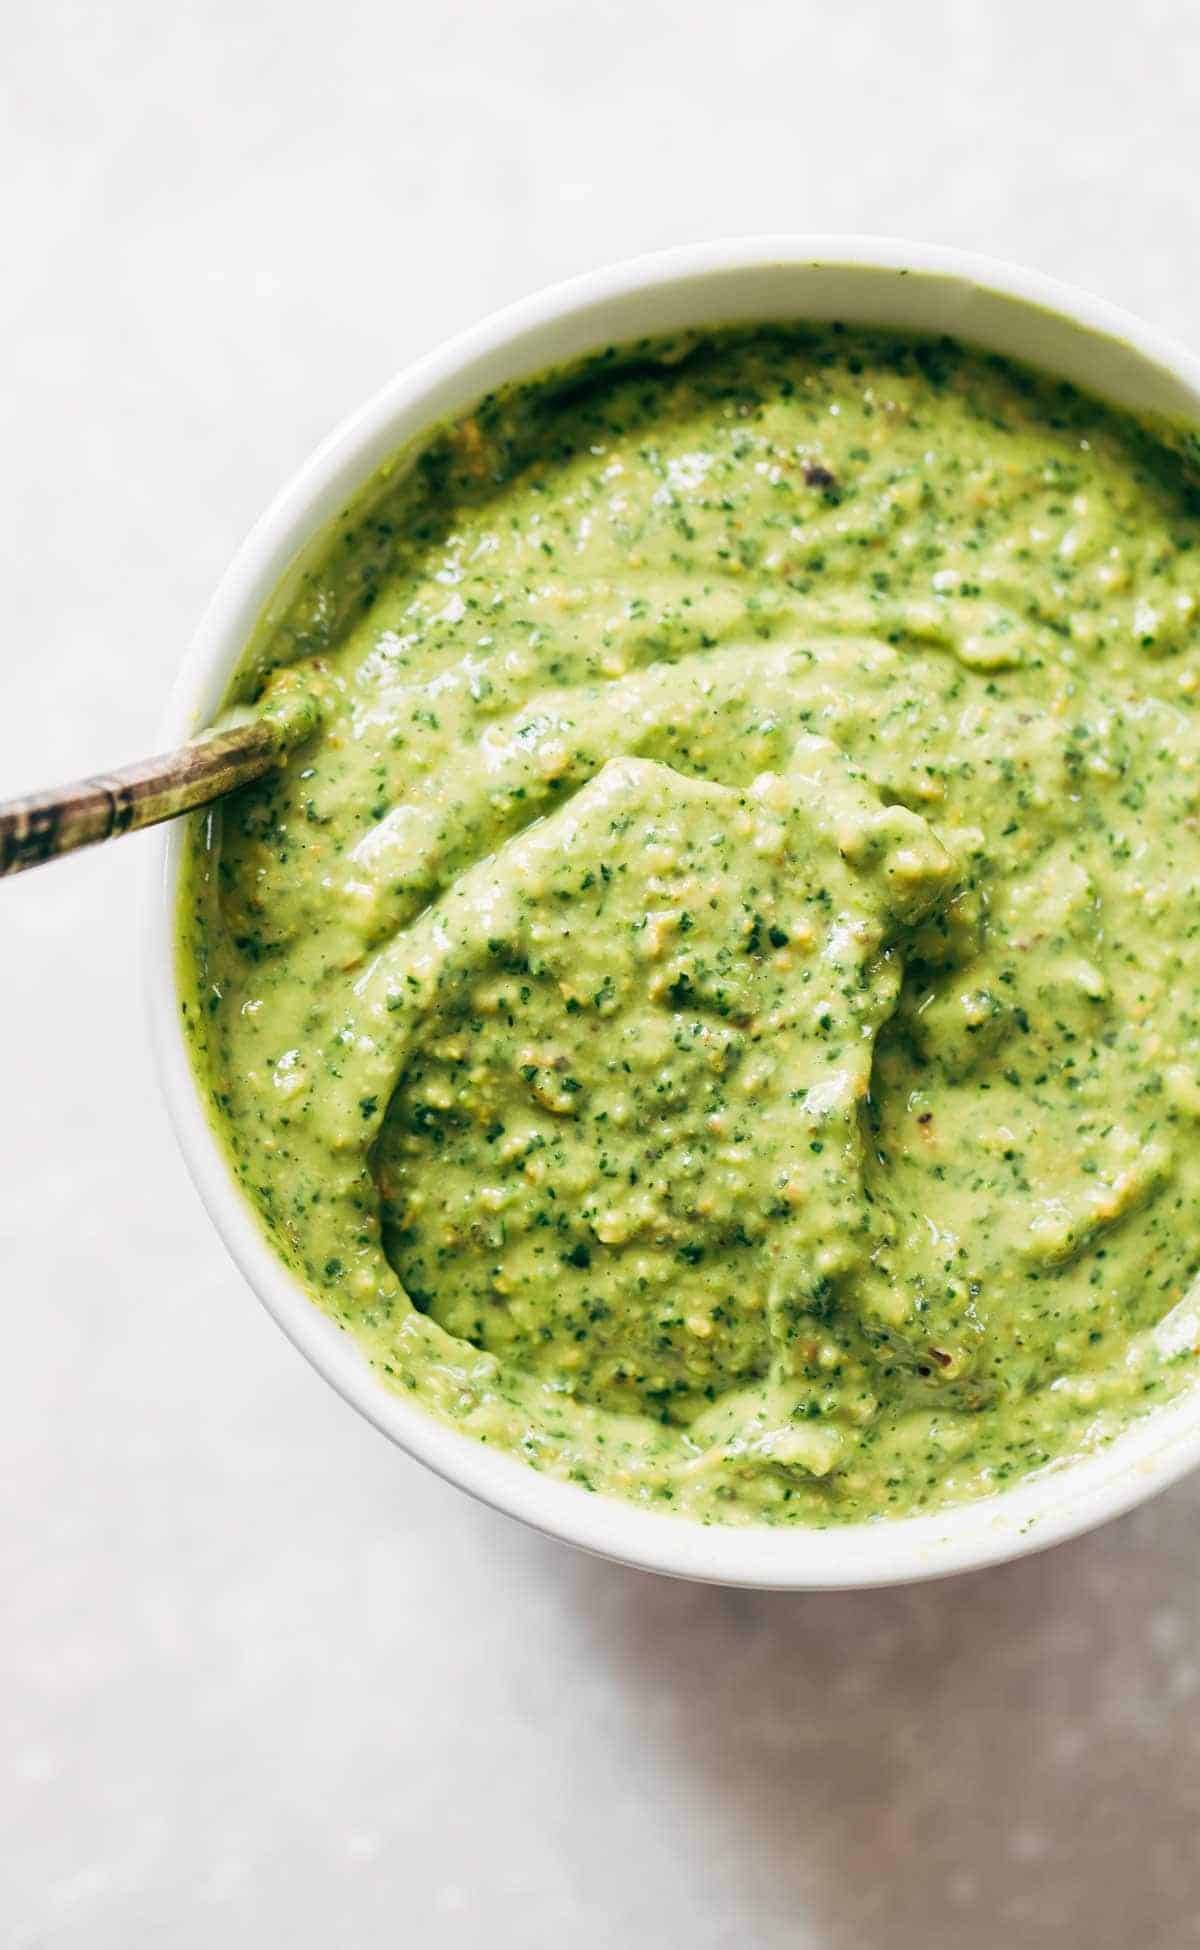 5 Minute Magic Green Sauce - use on salads, with chicken, or just as a dip! Easy ingredients like parsley, cilantro, avocado, garlic, and lime. Vegan! 